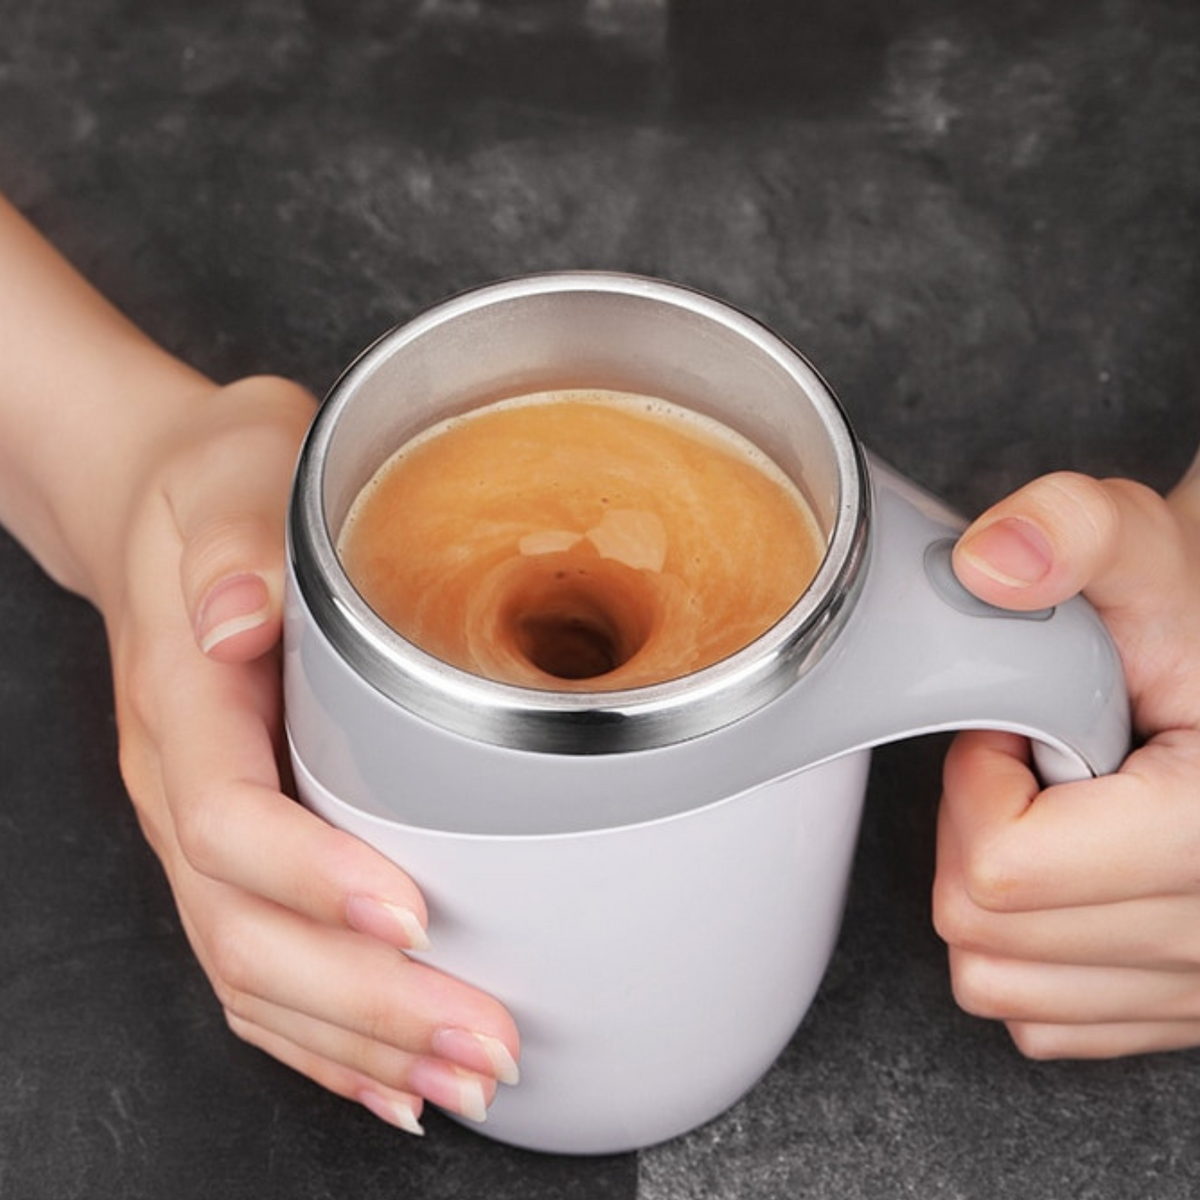 Classic Automatic Magnetic Stirring Cup – STARBREW